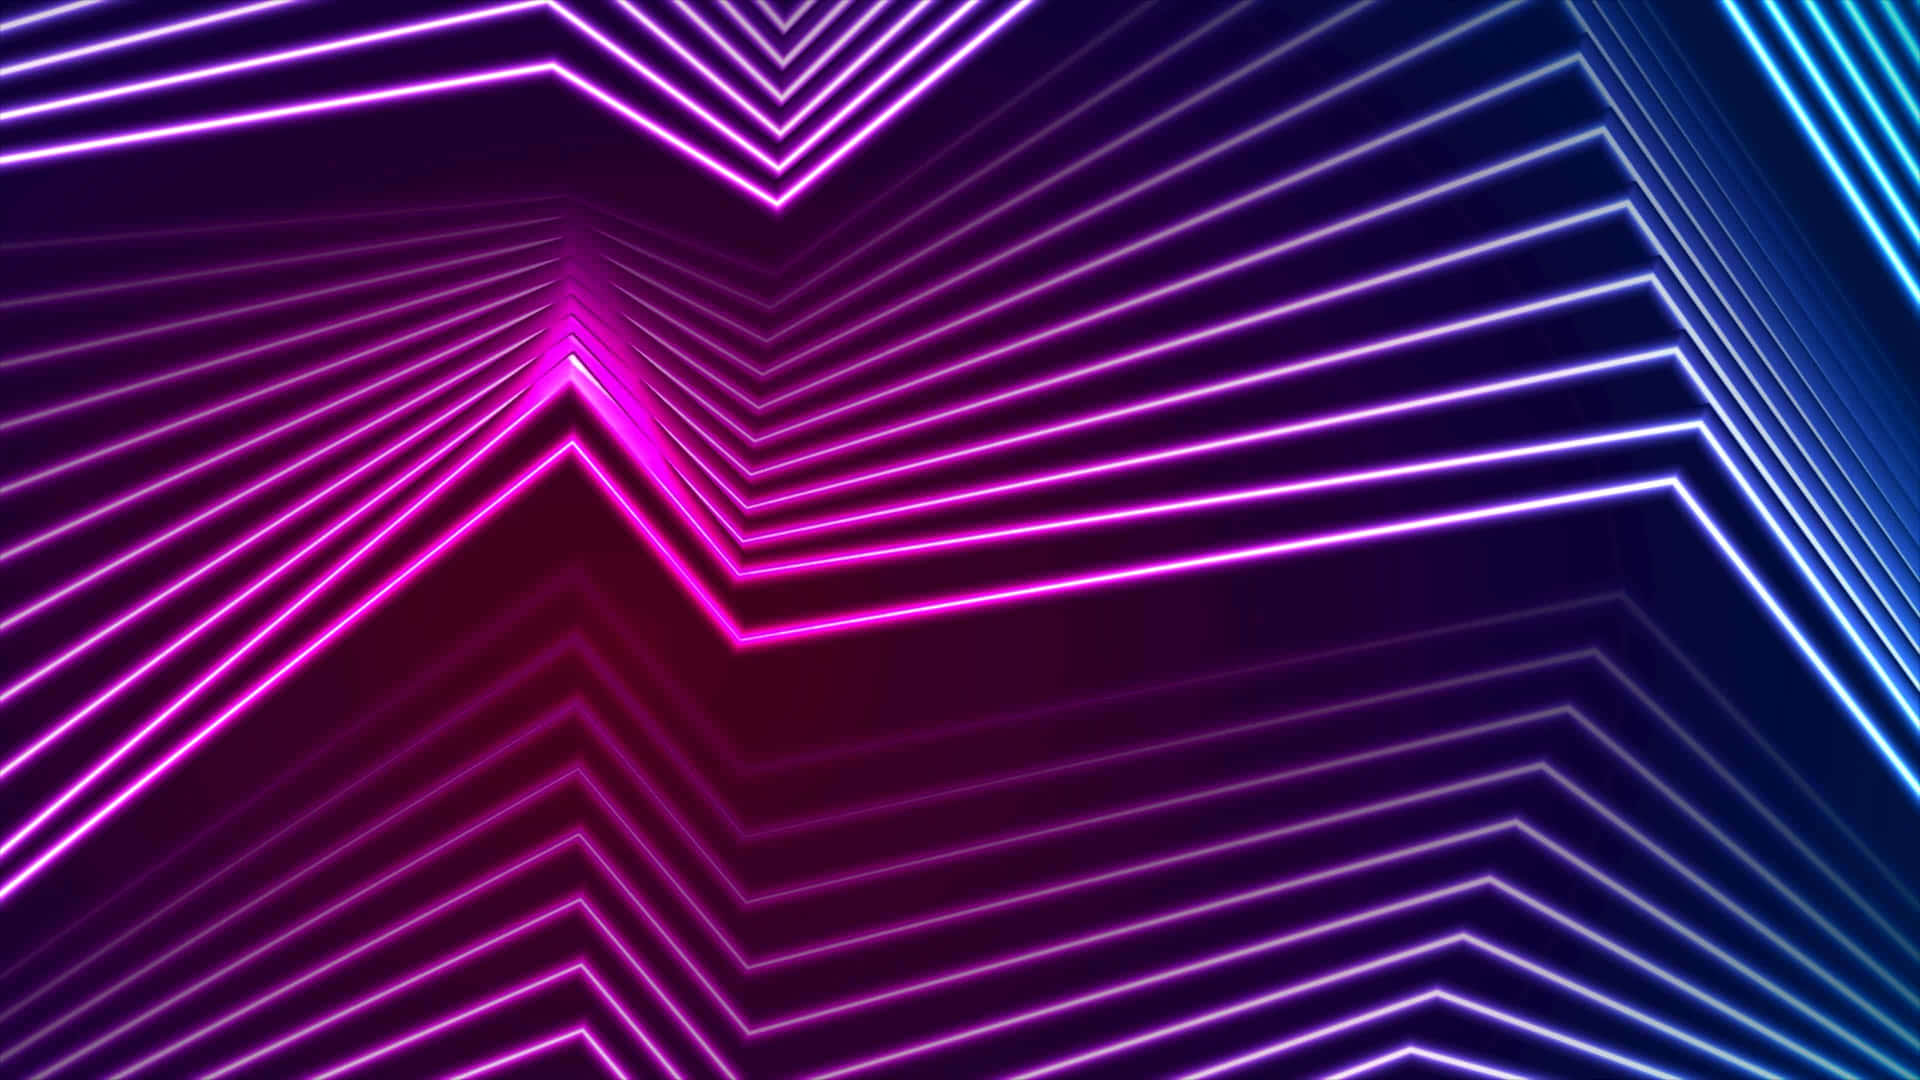 Brighten up your life with Neon Pink and Blue Wallpaper! Wallpaper